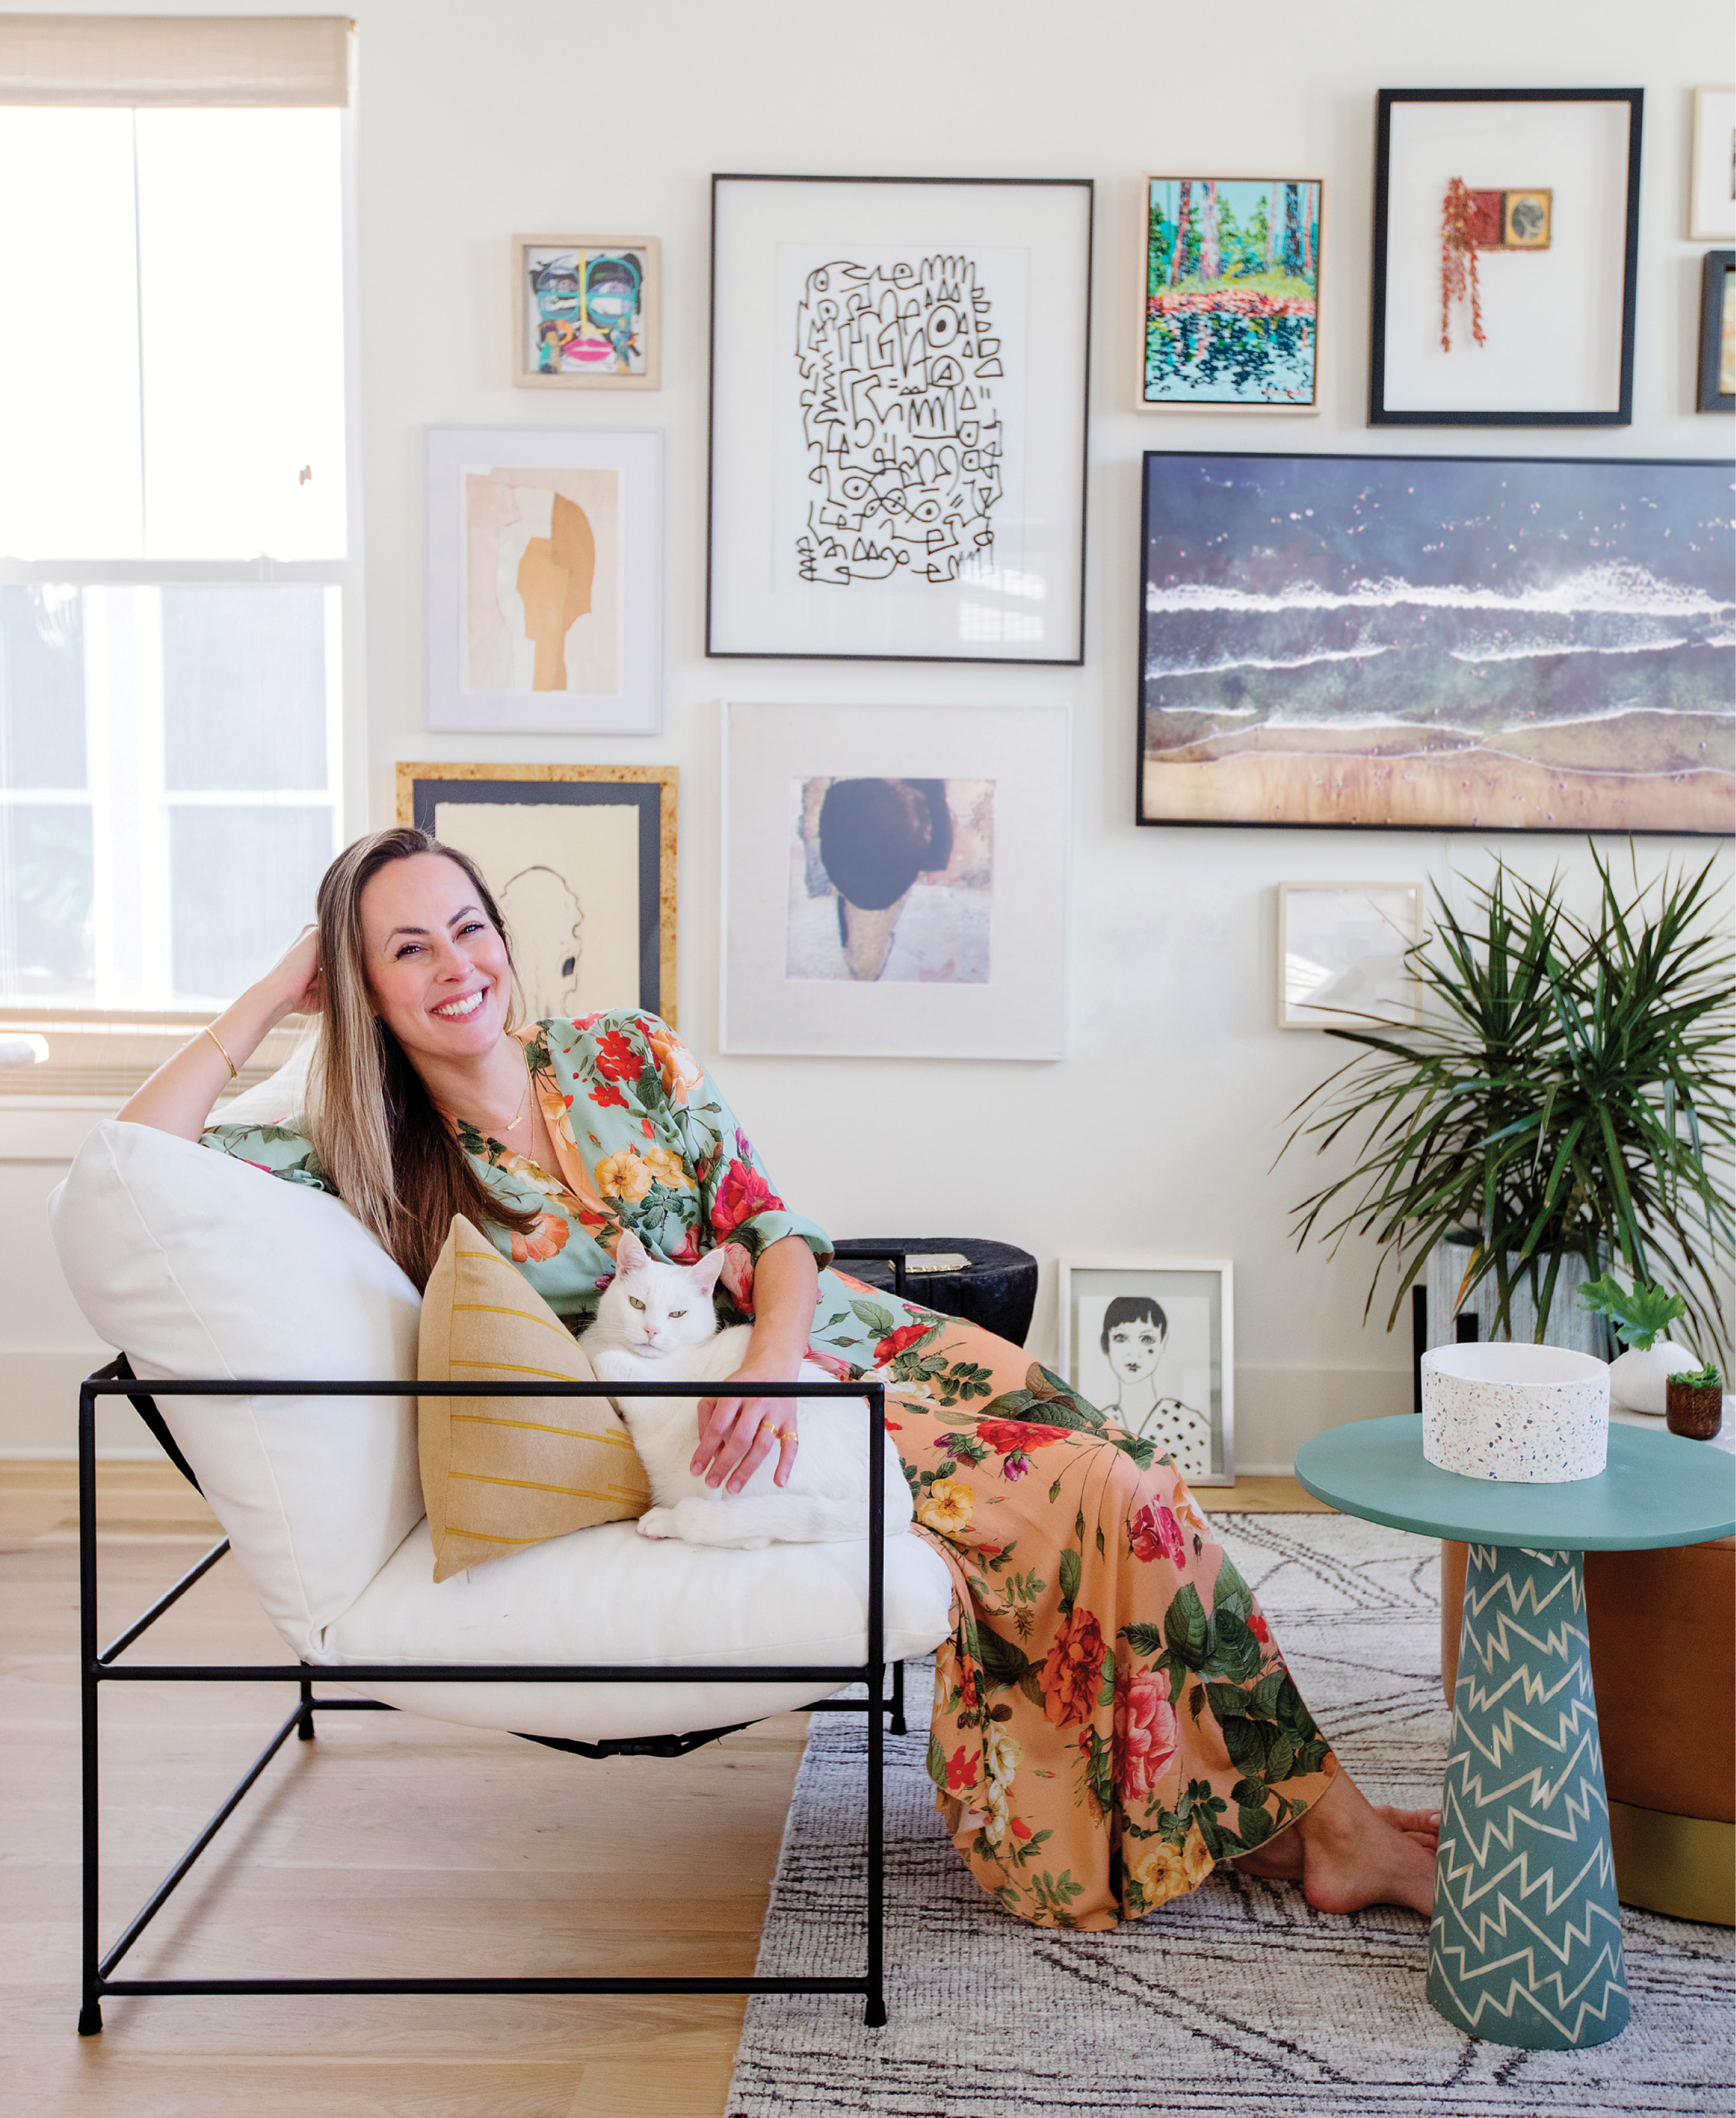 Interior designer Jesse Leigh Vickers loves an eclectic but collected art wall, especially the one she curated for her first home. Tour her new digs in Park Circle and pick up her tips for infusing spaces with personality and luxe details.